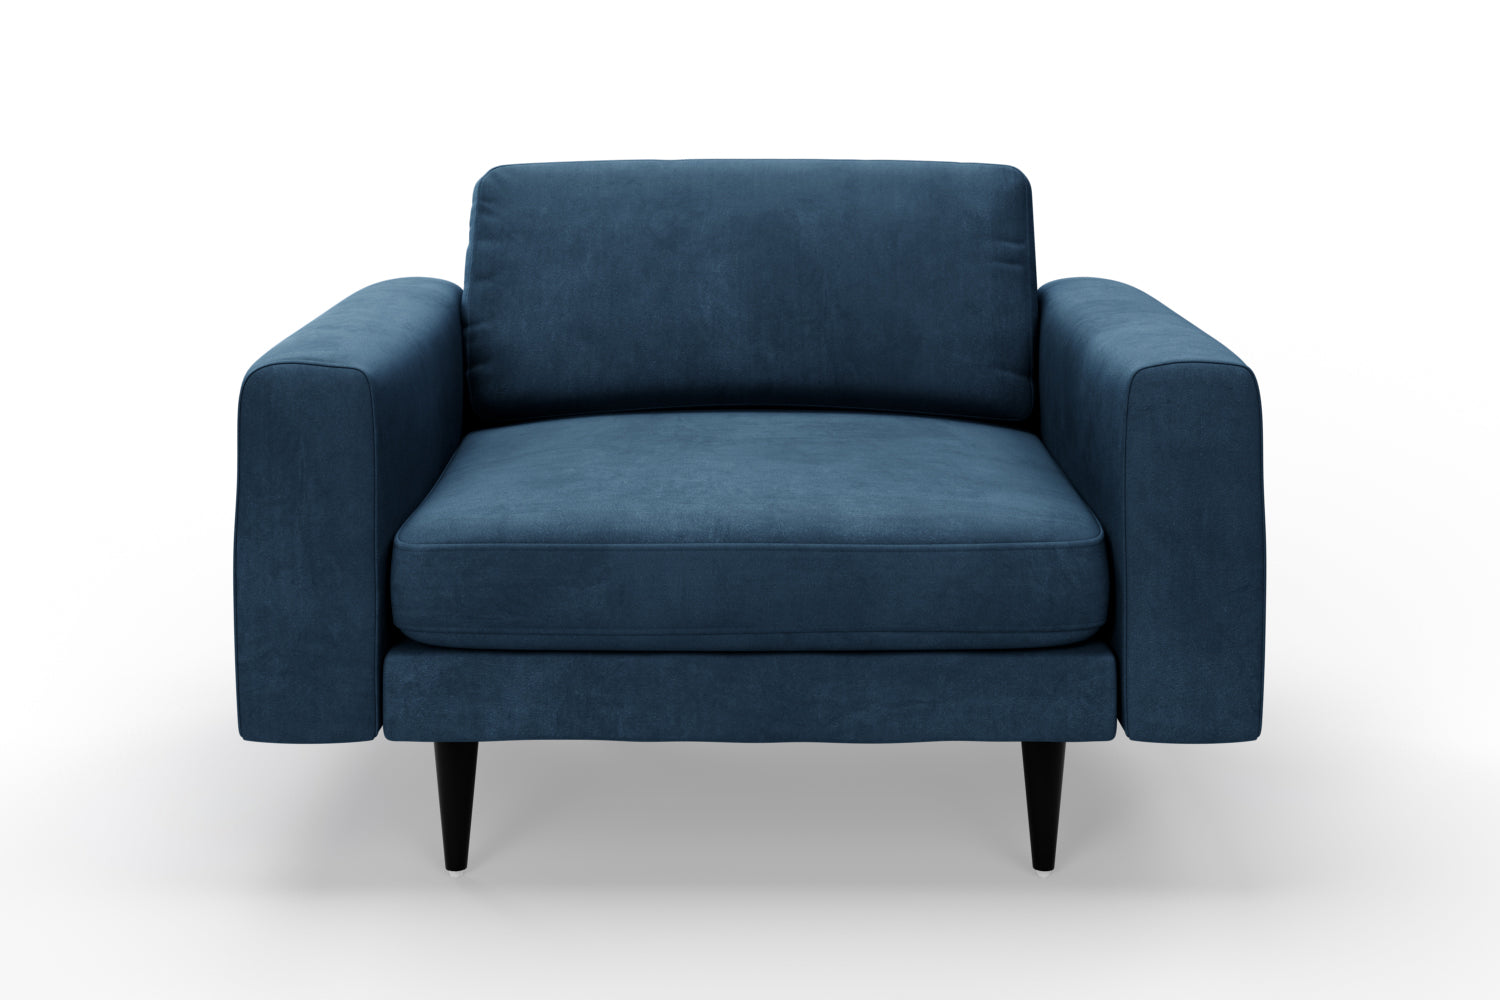 SNUG | The Big Chill 1.5 Seater Snuggler in Blue Steel variant_40414875385904